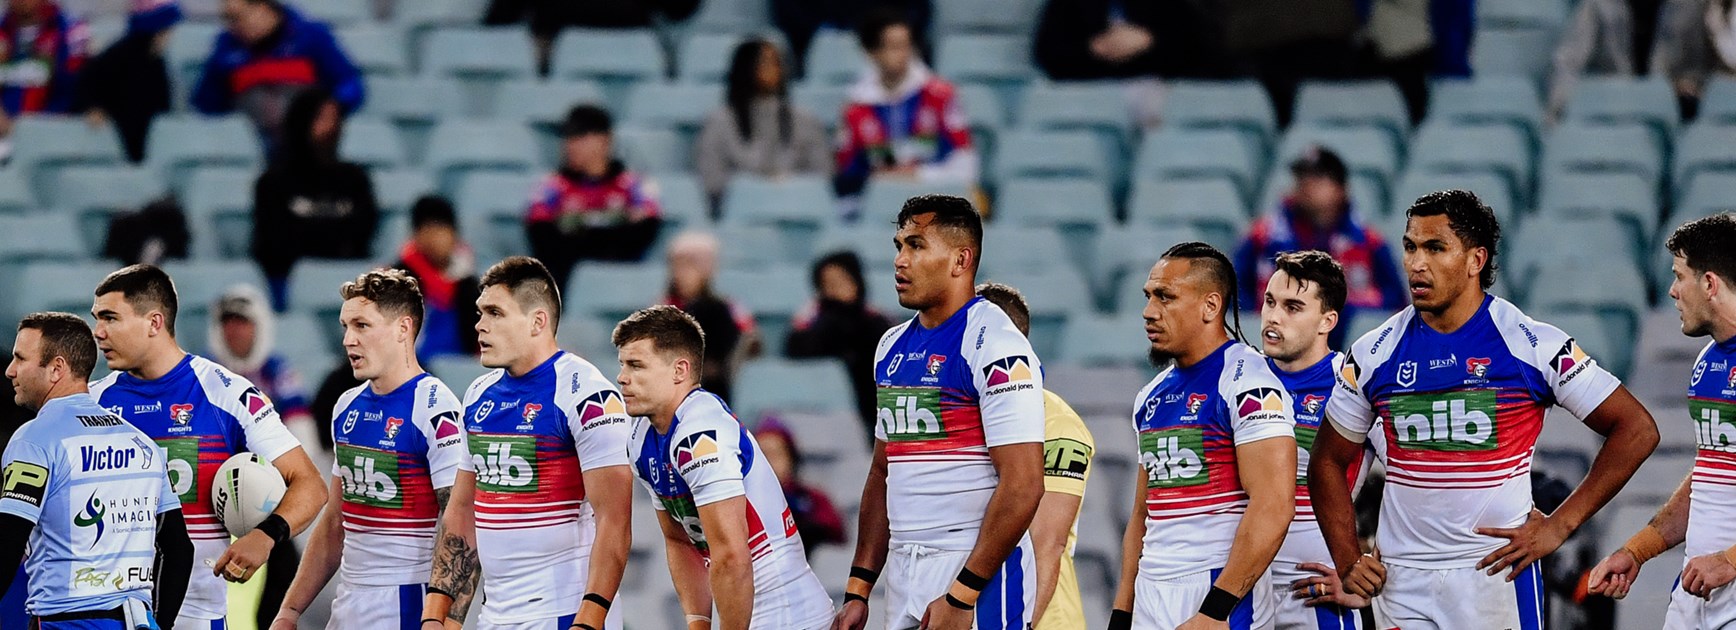 Clinical Souths prove too good for valiant Knights